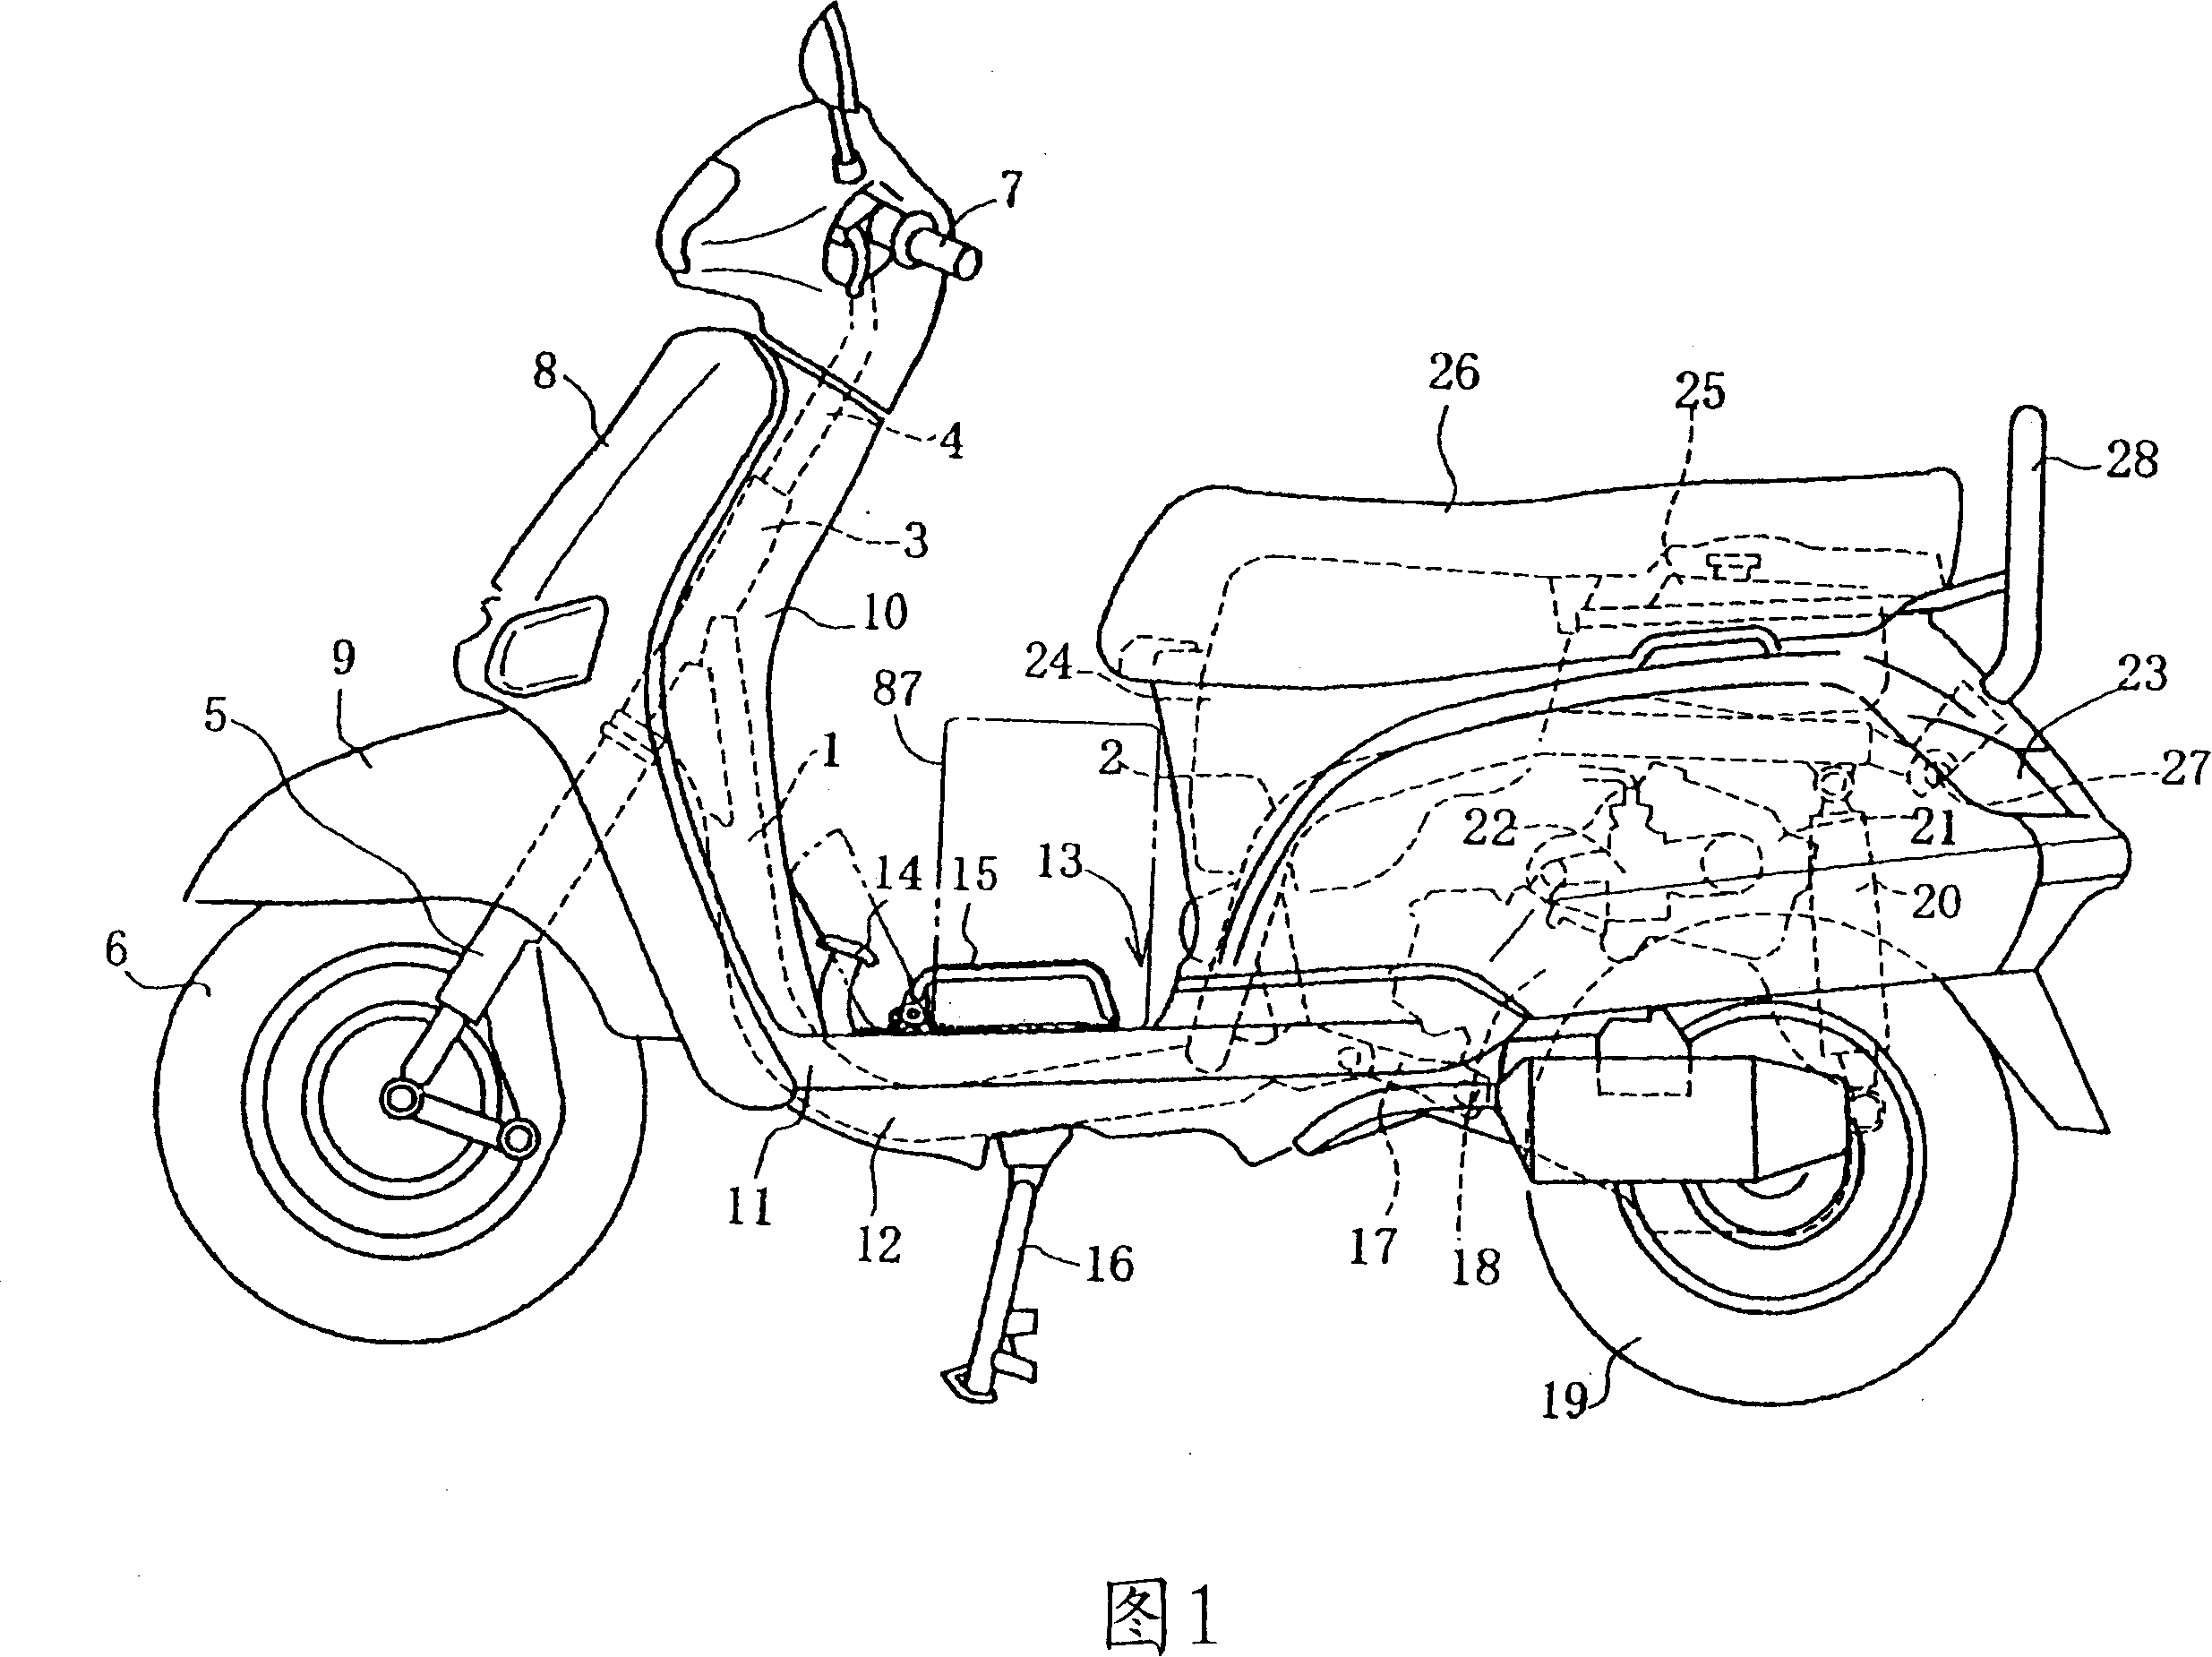 Baseboard structure for small size motorcycle